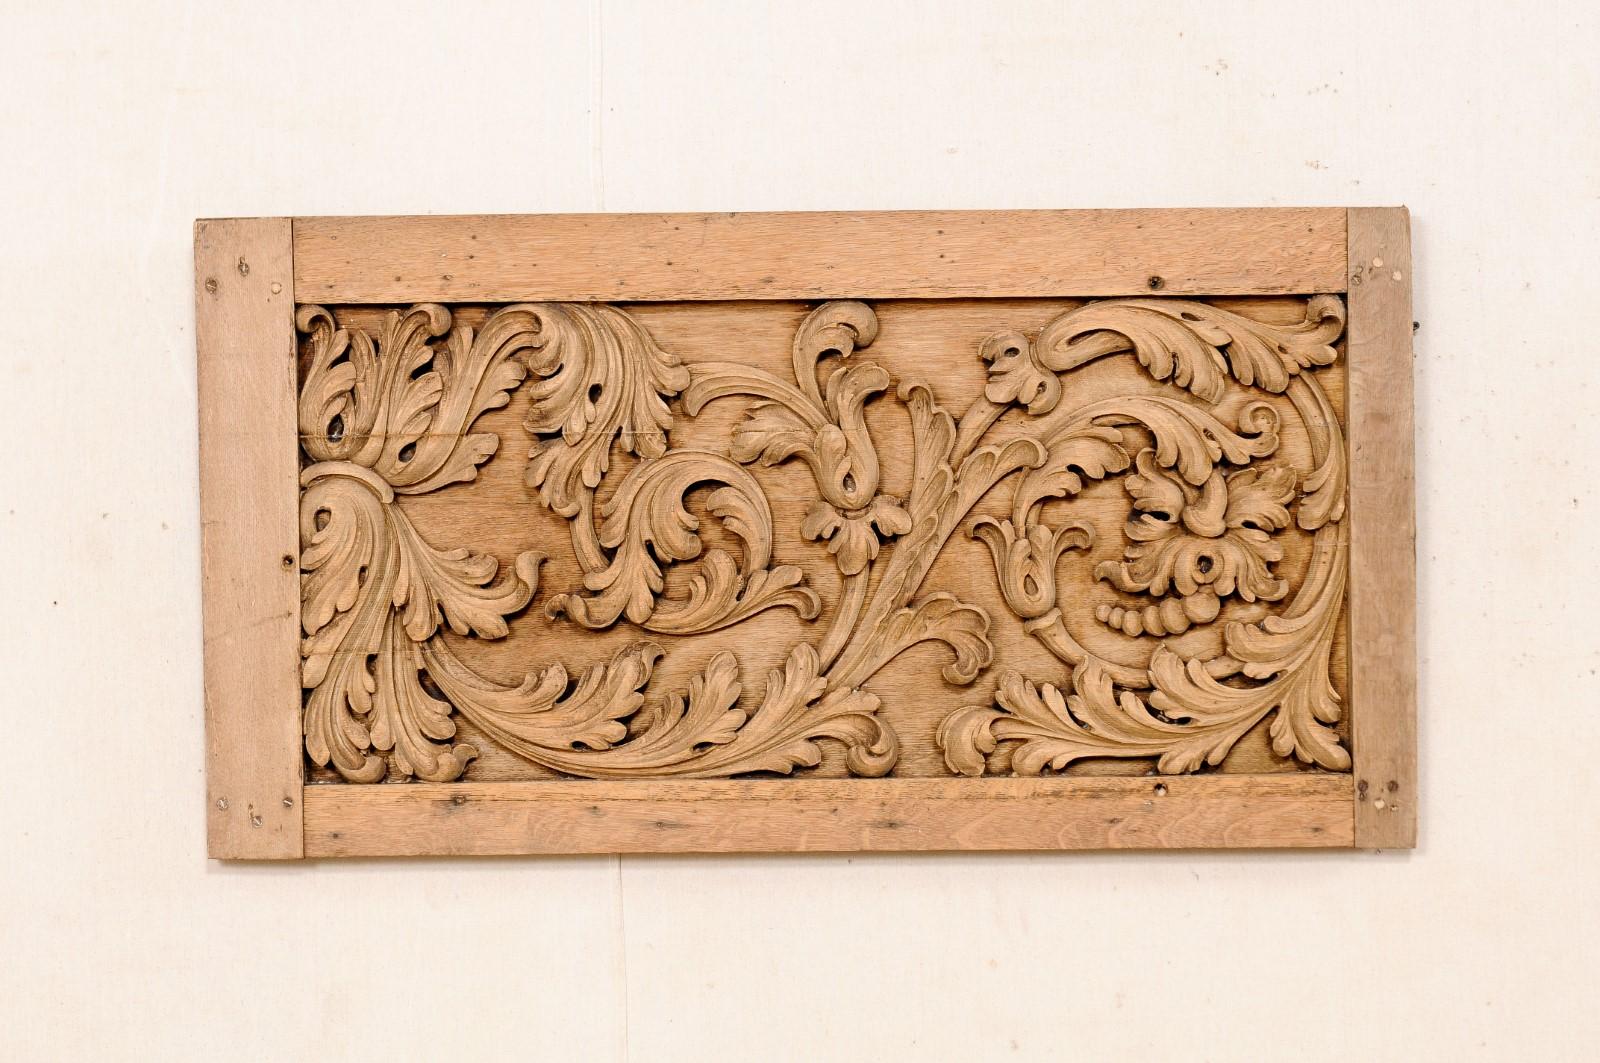 A French carved-wood plaque from the 19th century. This antique wall decoration from France features a rectangular-shaped frame, comprised of straight-boards, with center adorn in a hand-carved relief motif of scrolling acanthus leaves. There is a